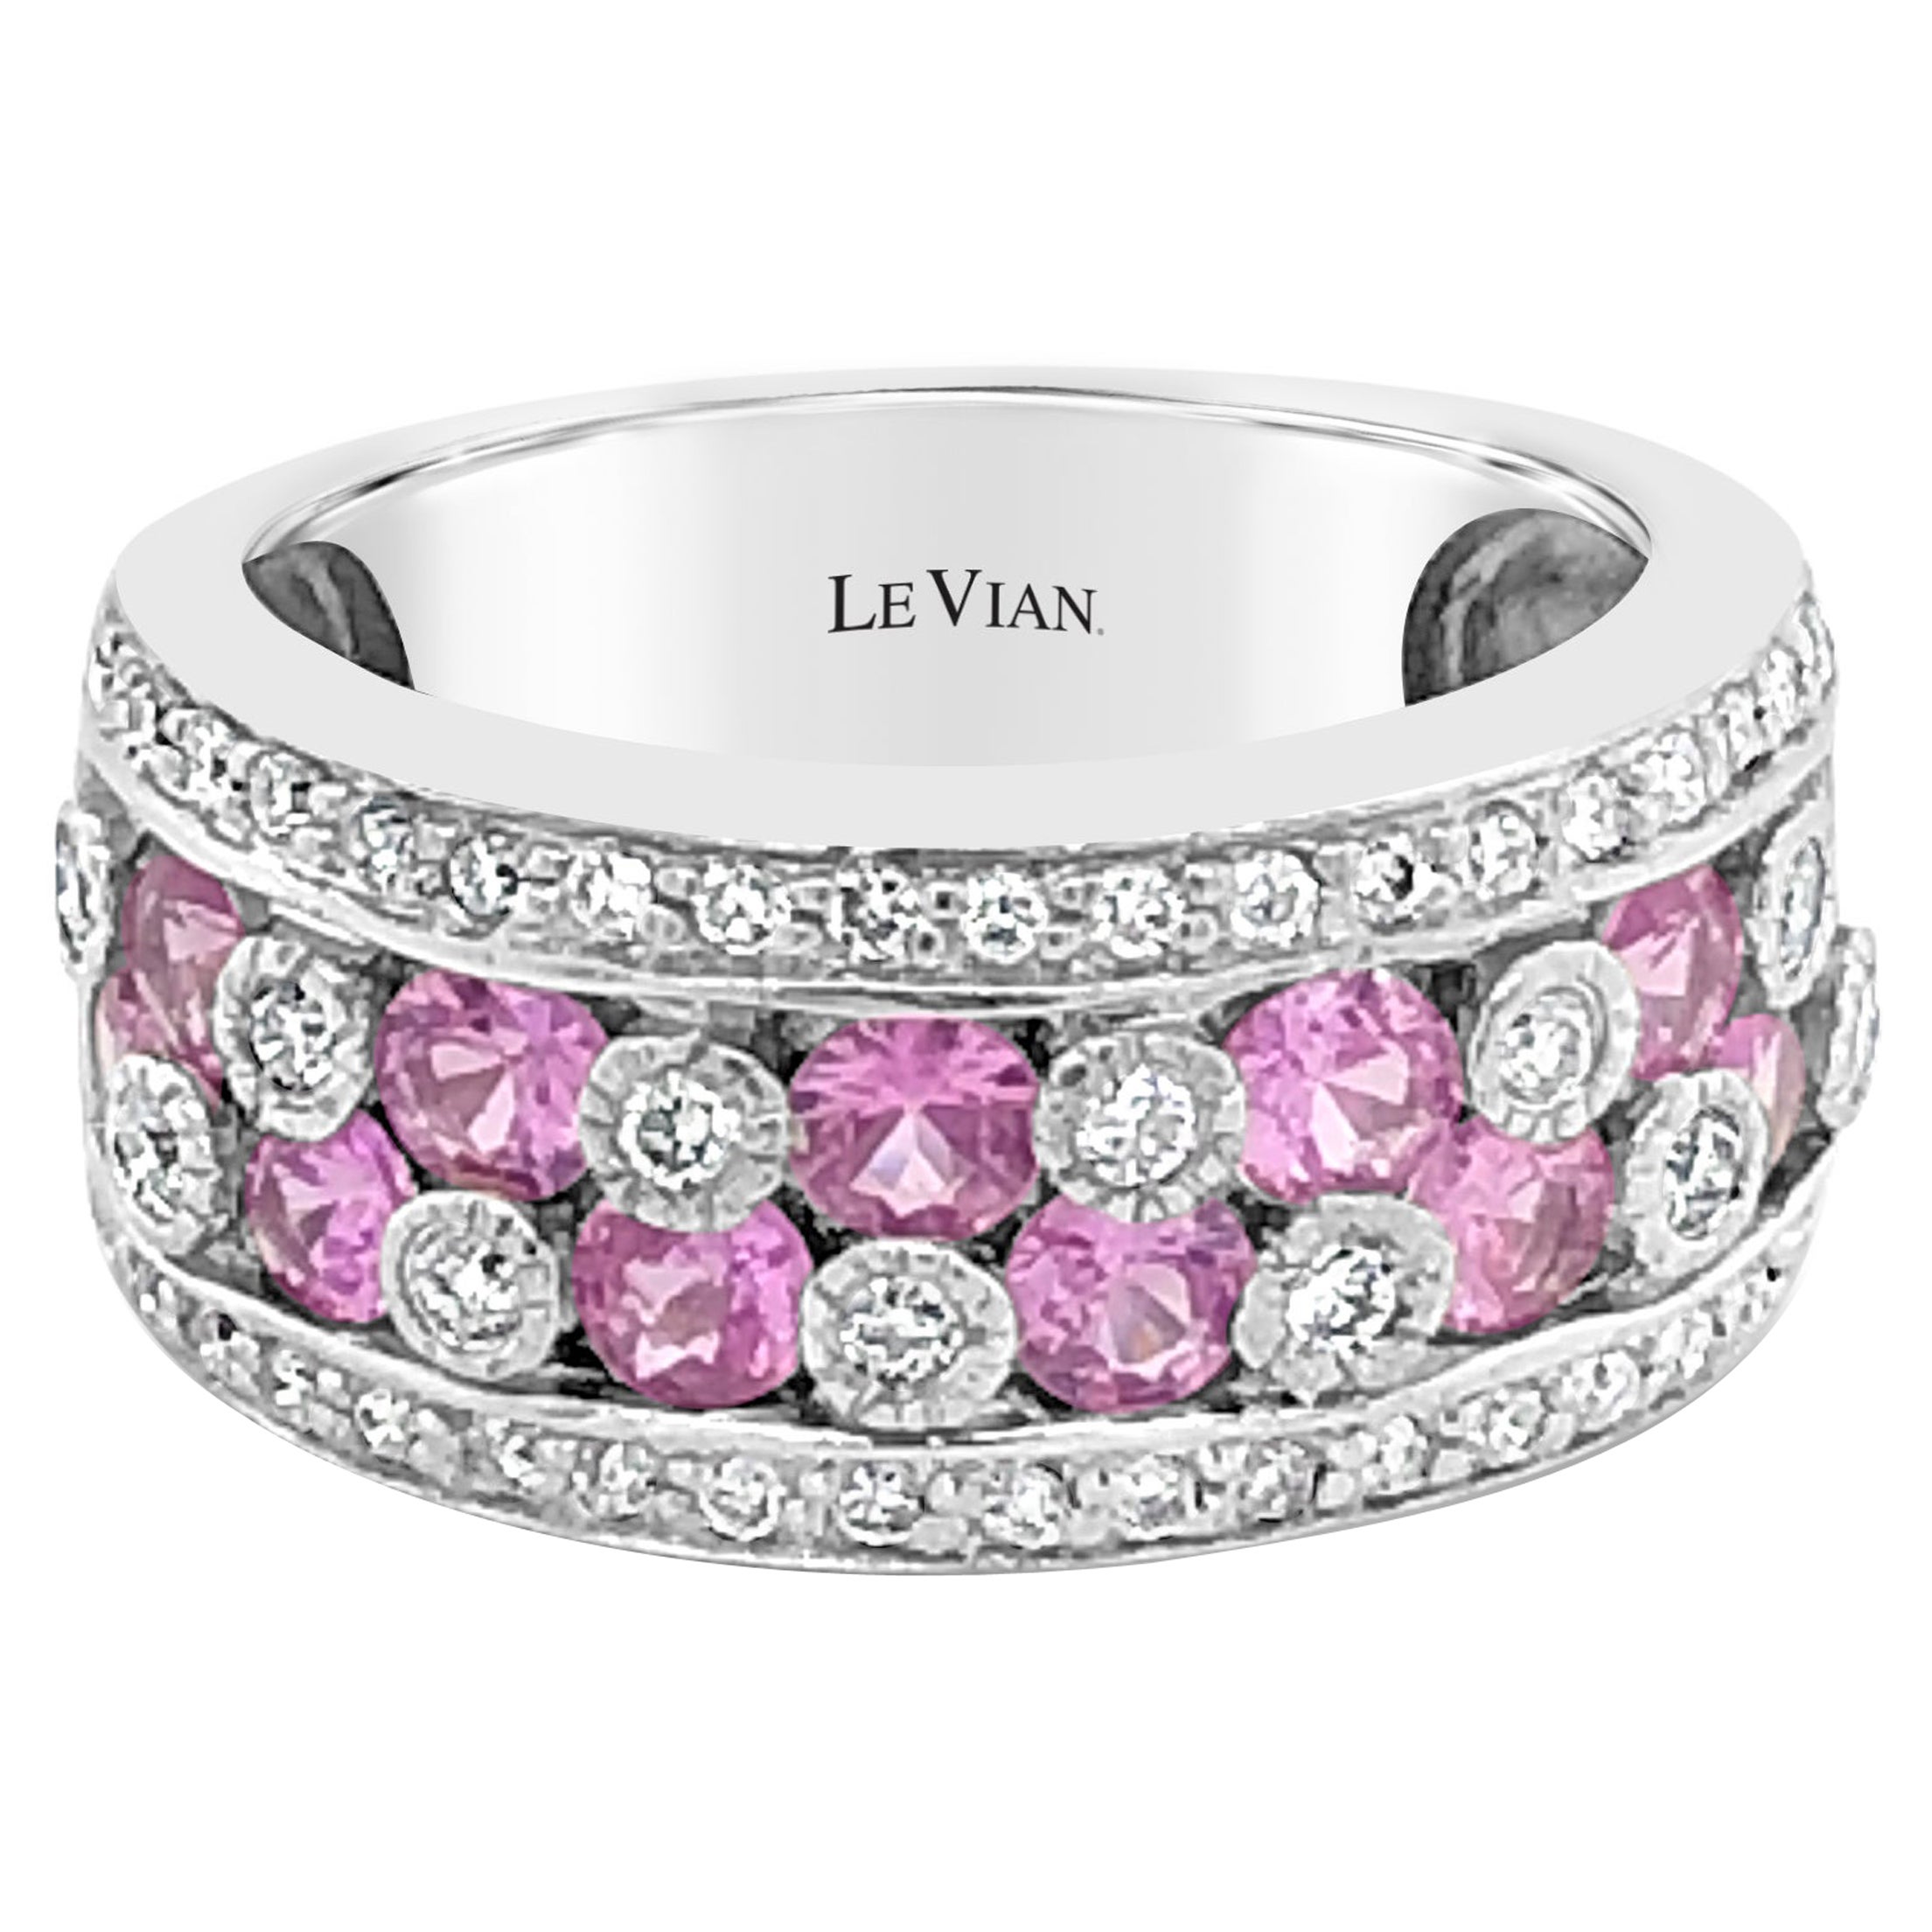 LeVian 14K White Gold Pink Sapphire Round Diamond Classy Cocktail Band Ring